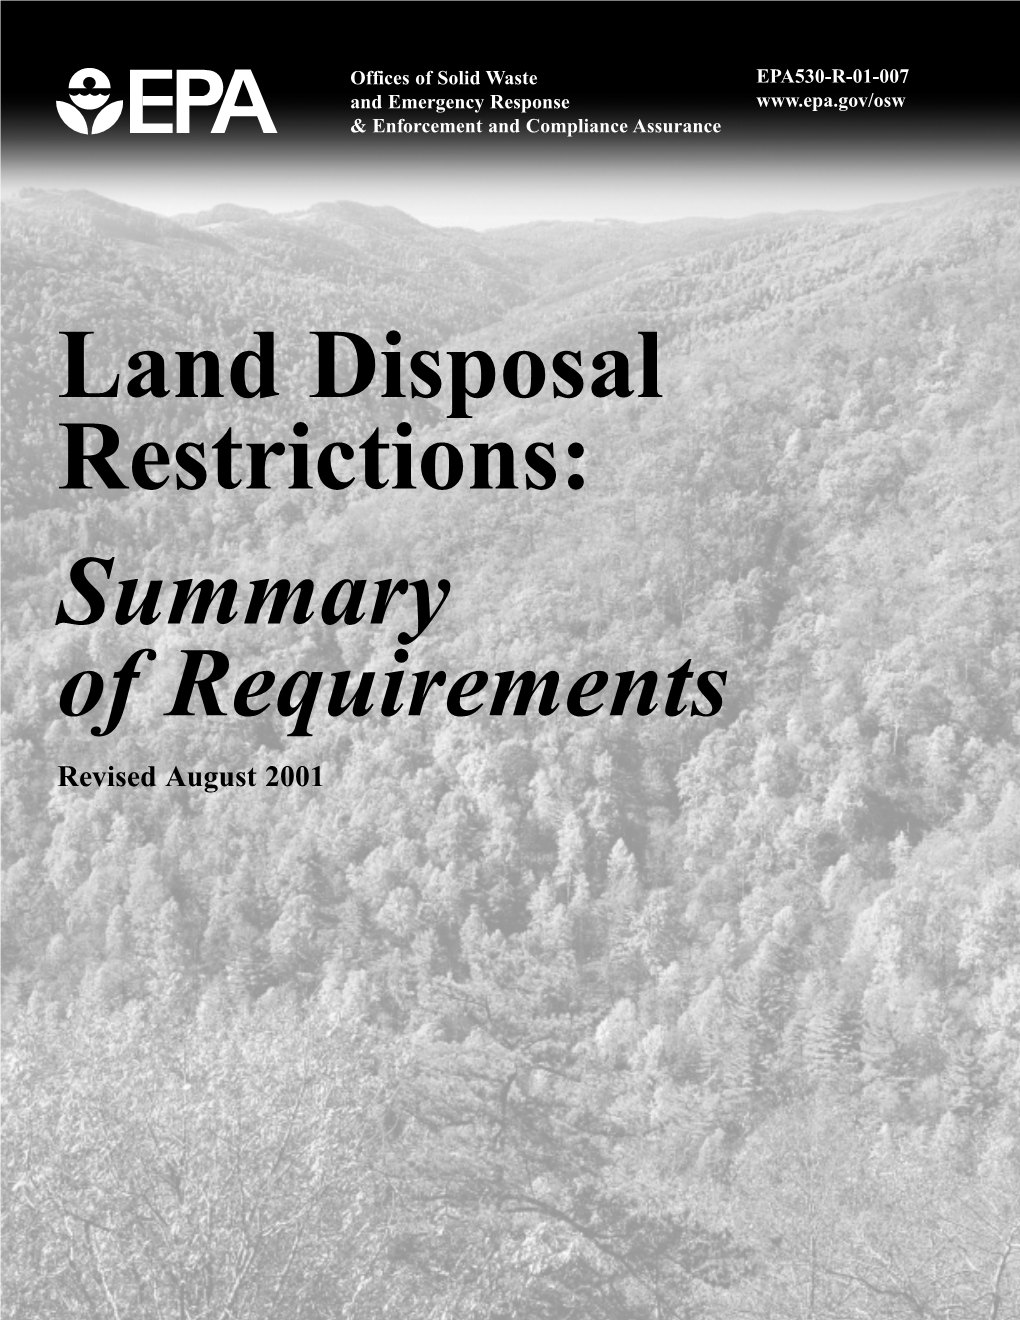 Land Disposal Restrictions: Summary of Requirements Revised August 2001 NOTICE